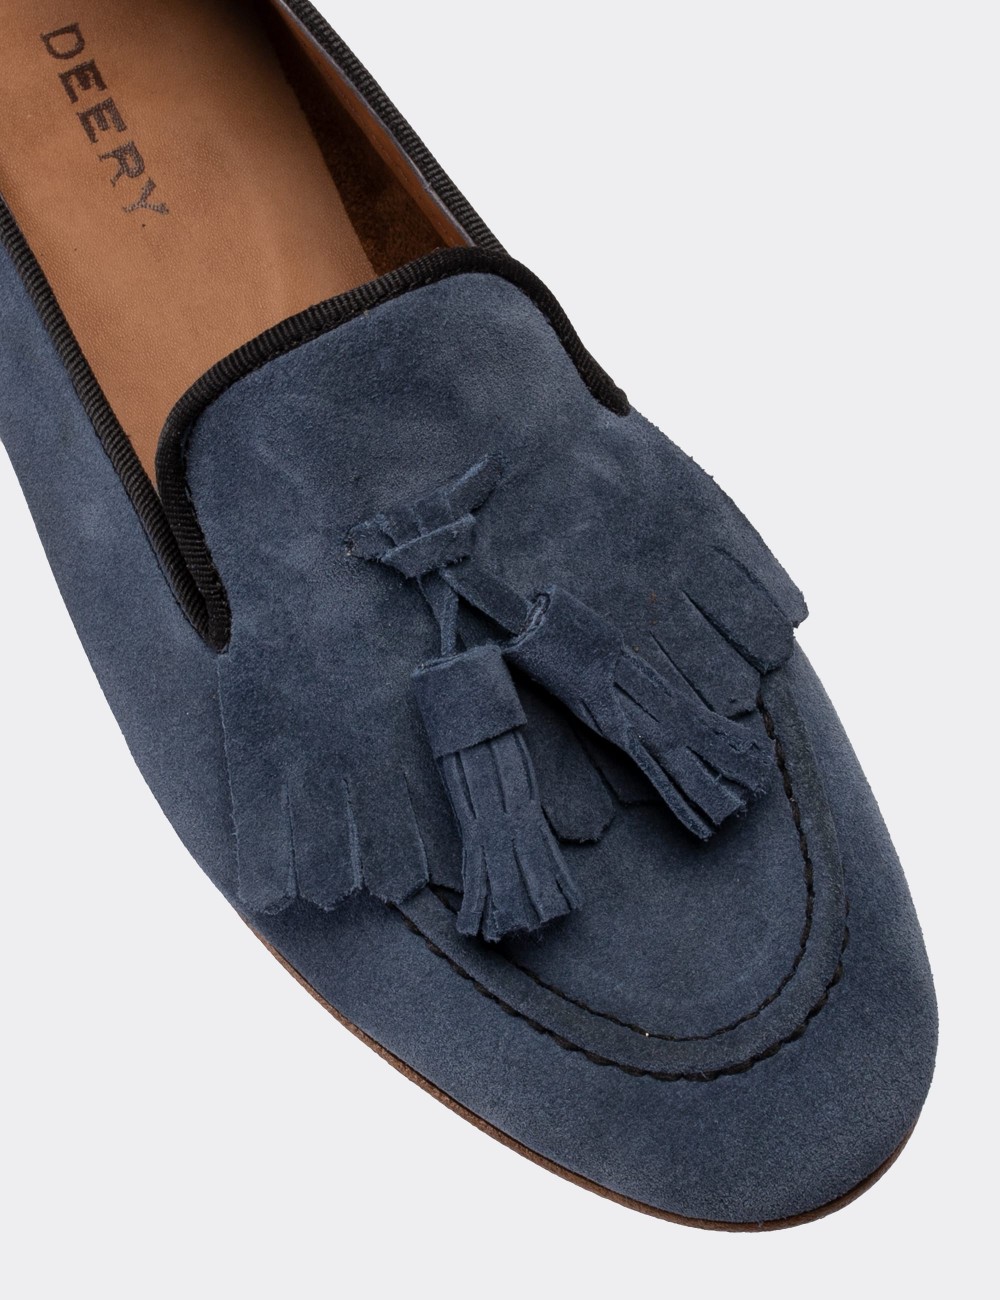 Blue Suede Leather Loafers - 01618ZMVIM02